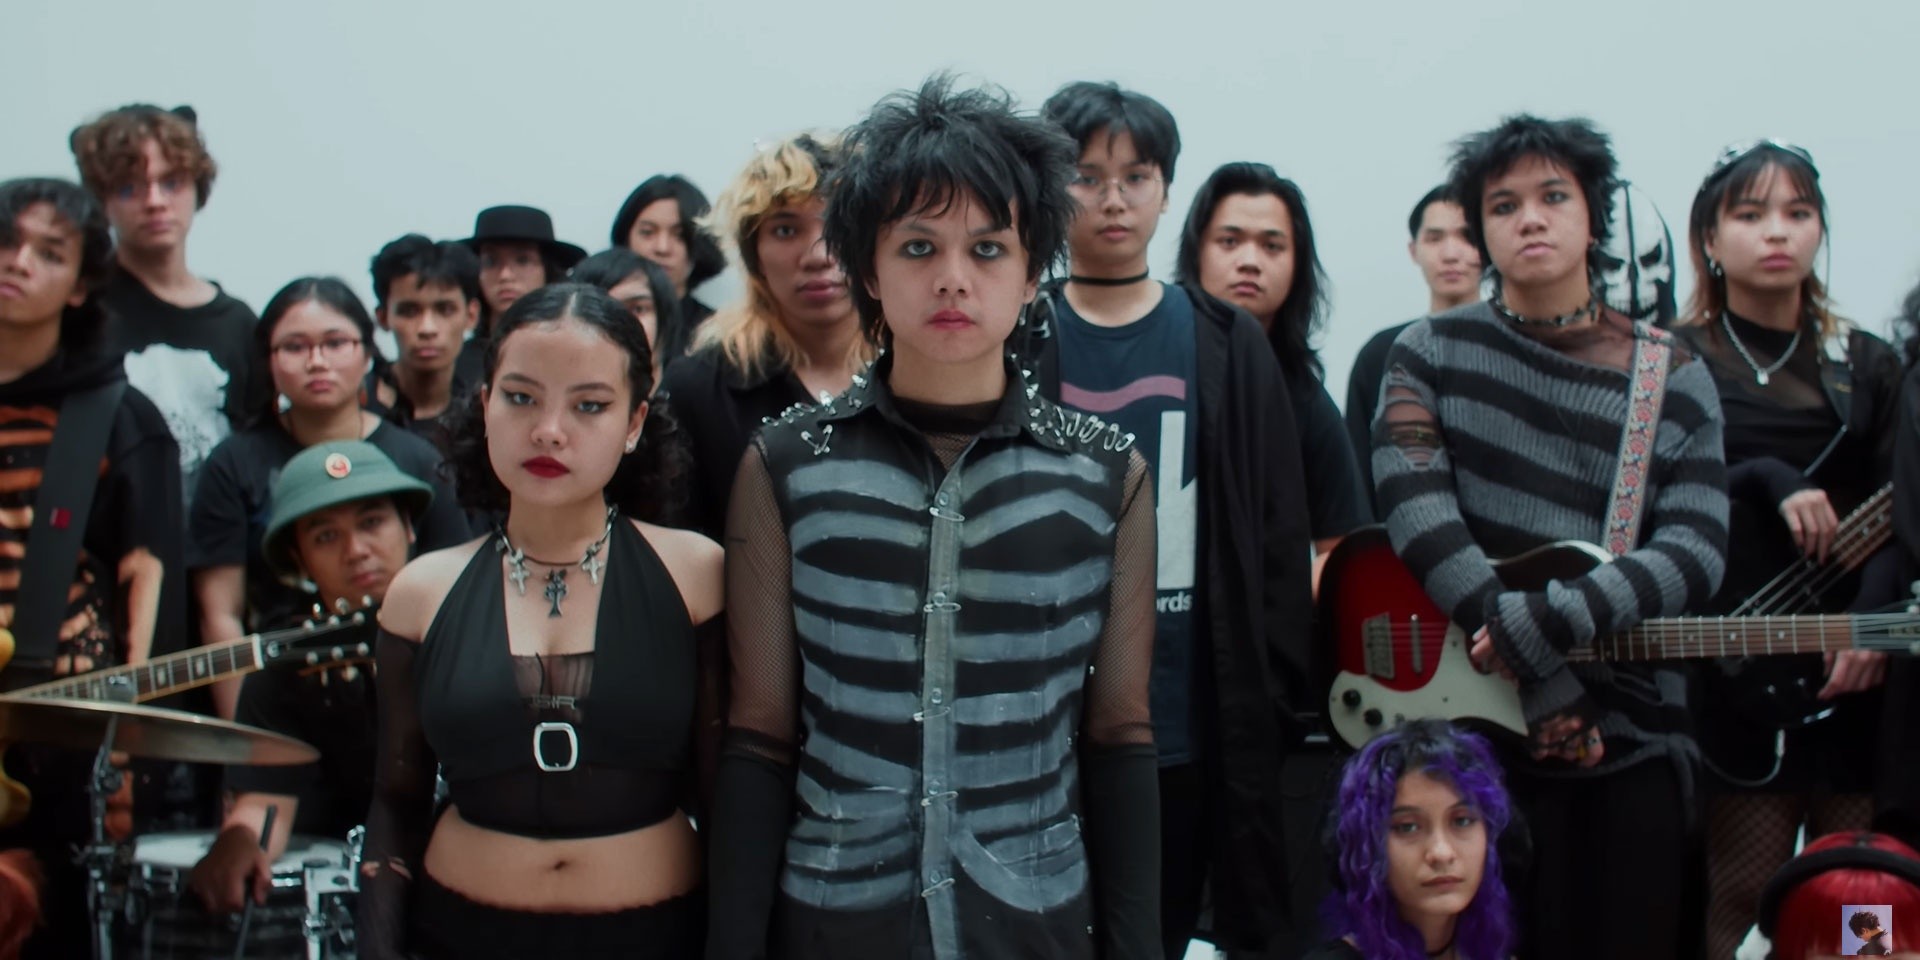 Zild goes emo in new 'Isang Anghel' music video – watch